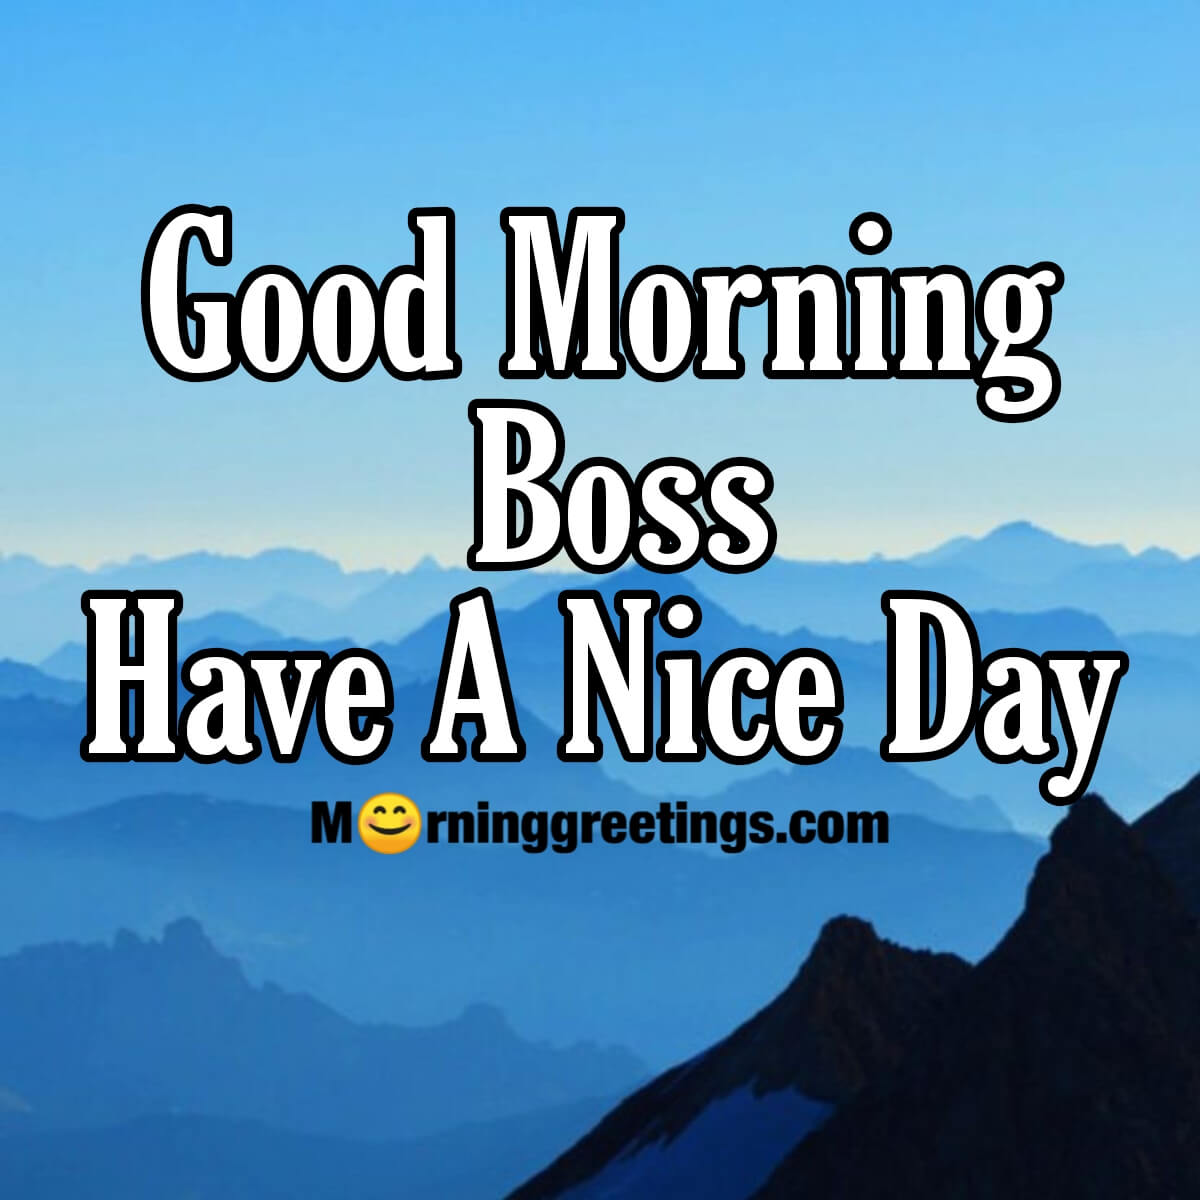 Good Morning Boss Have A Nice Day